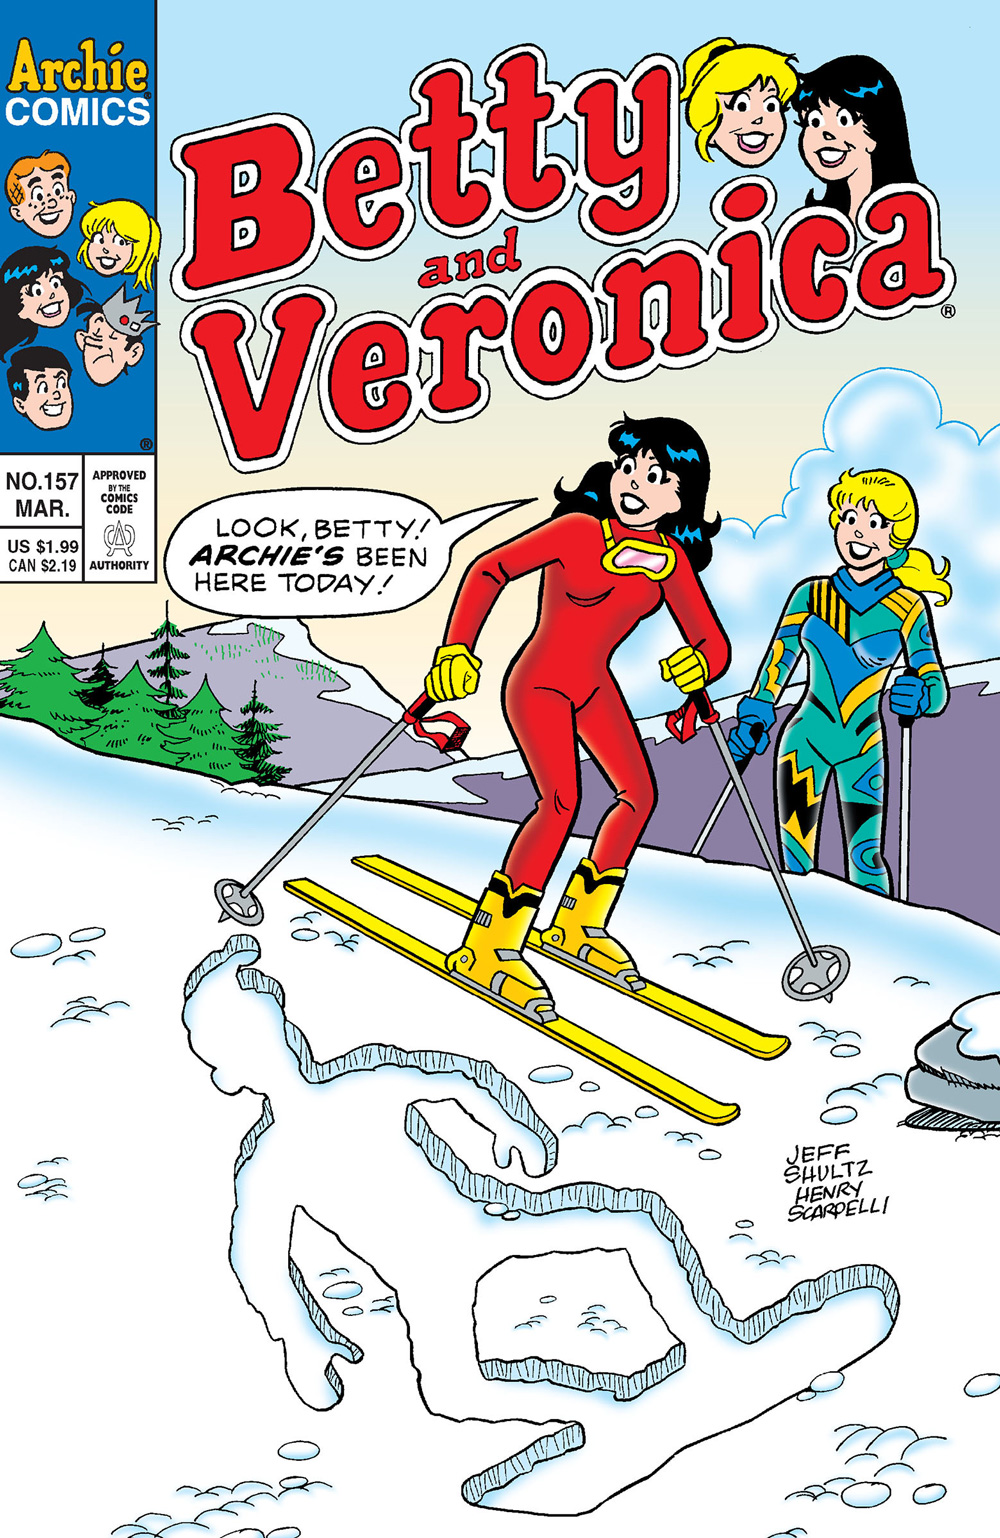 Betty and Veronica are skiing and they see the imprint of a human body in the snow. Veronica says it means Archie has been here today.